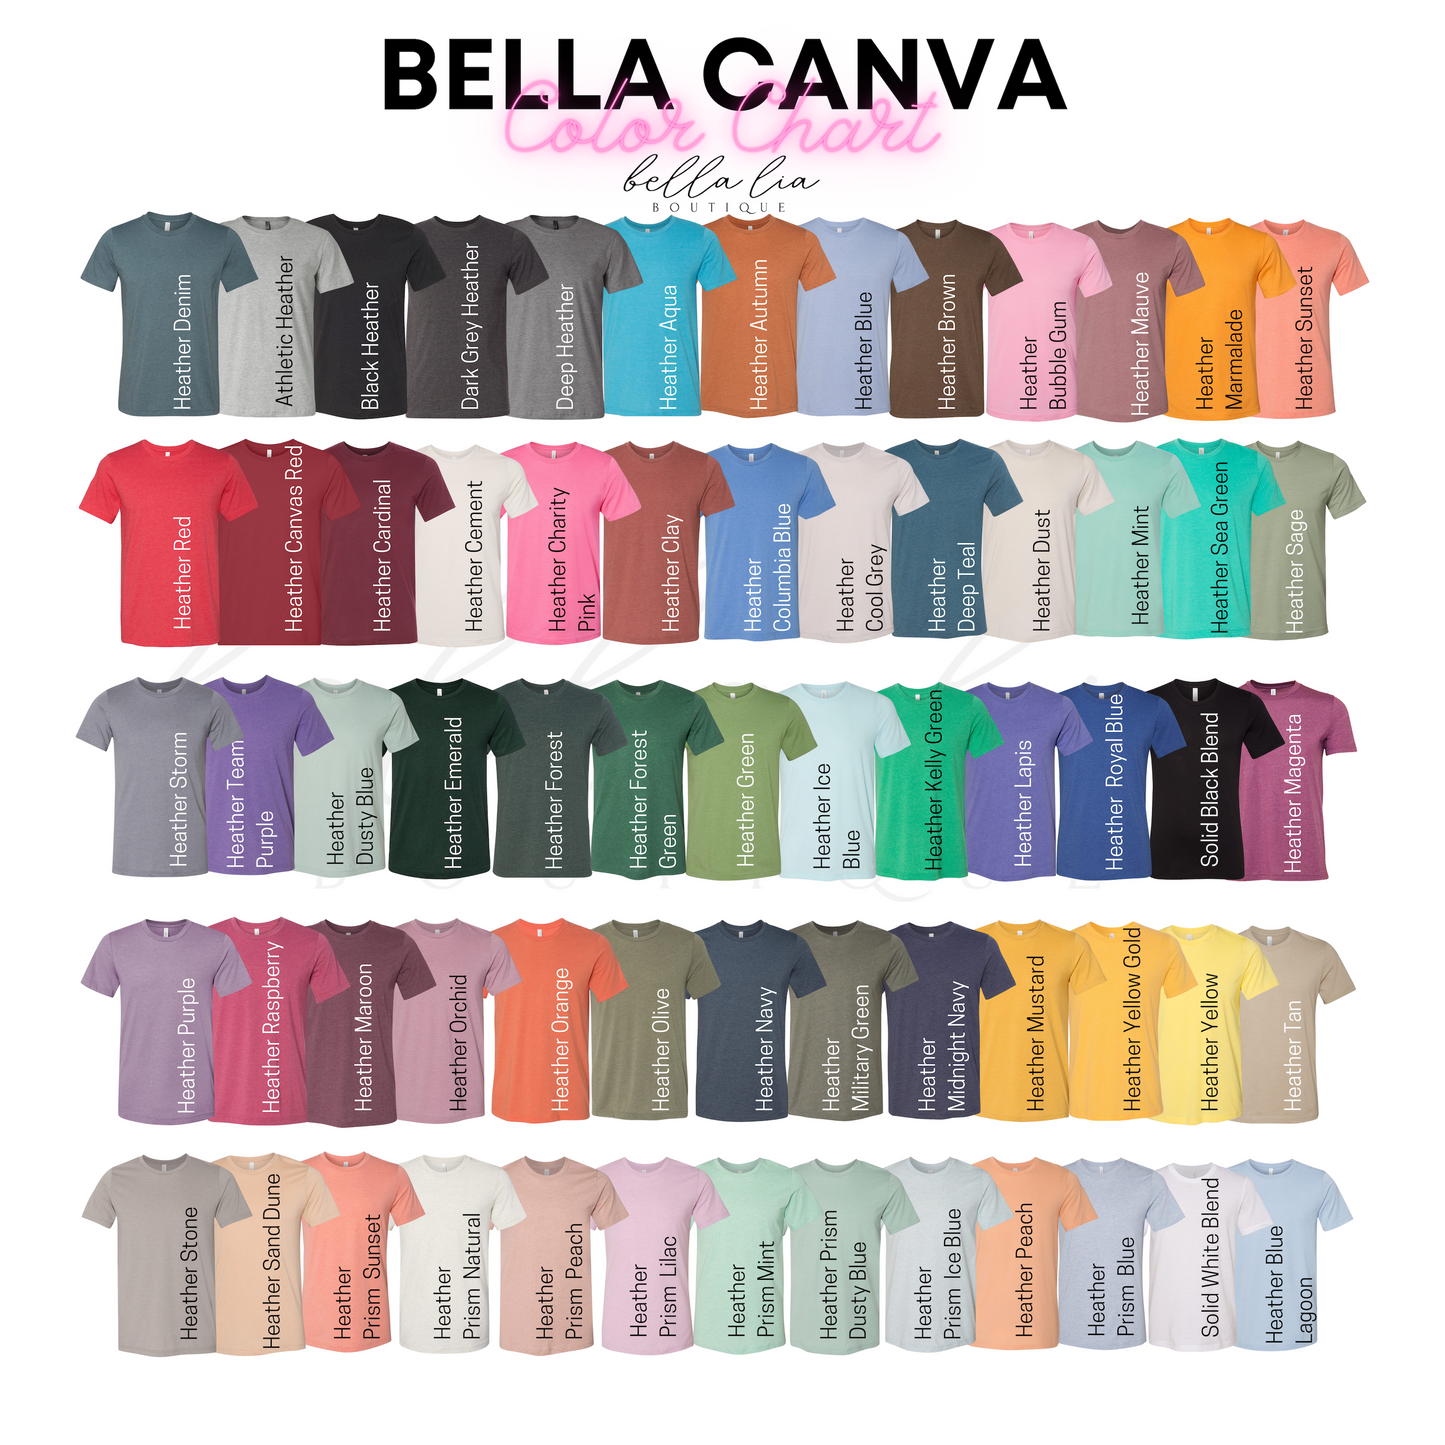 My First Father's Day Men's Graphic Tee - Bella Lia Boutique